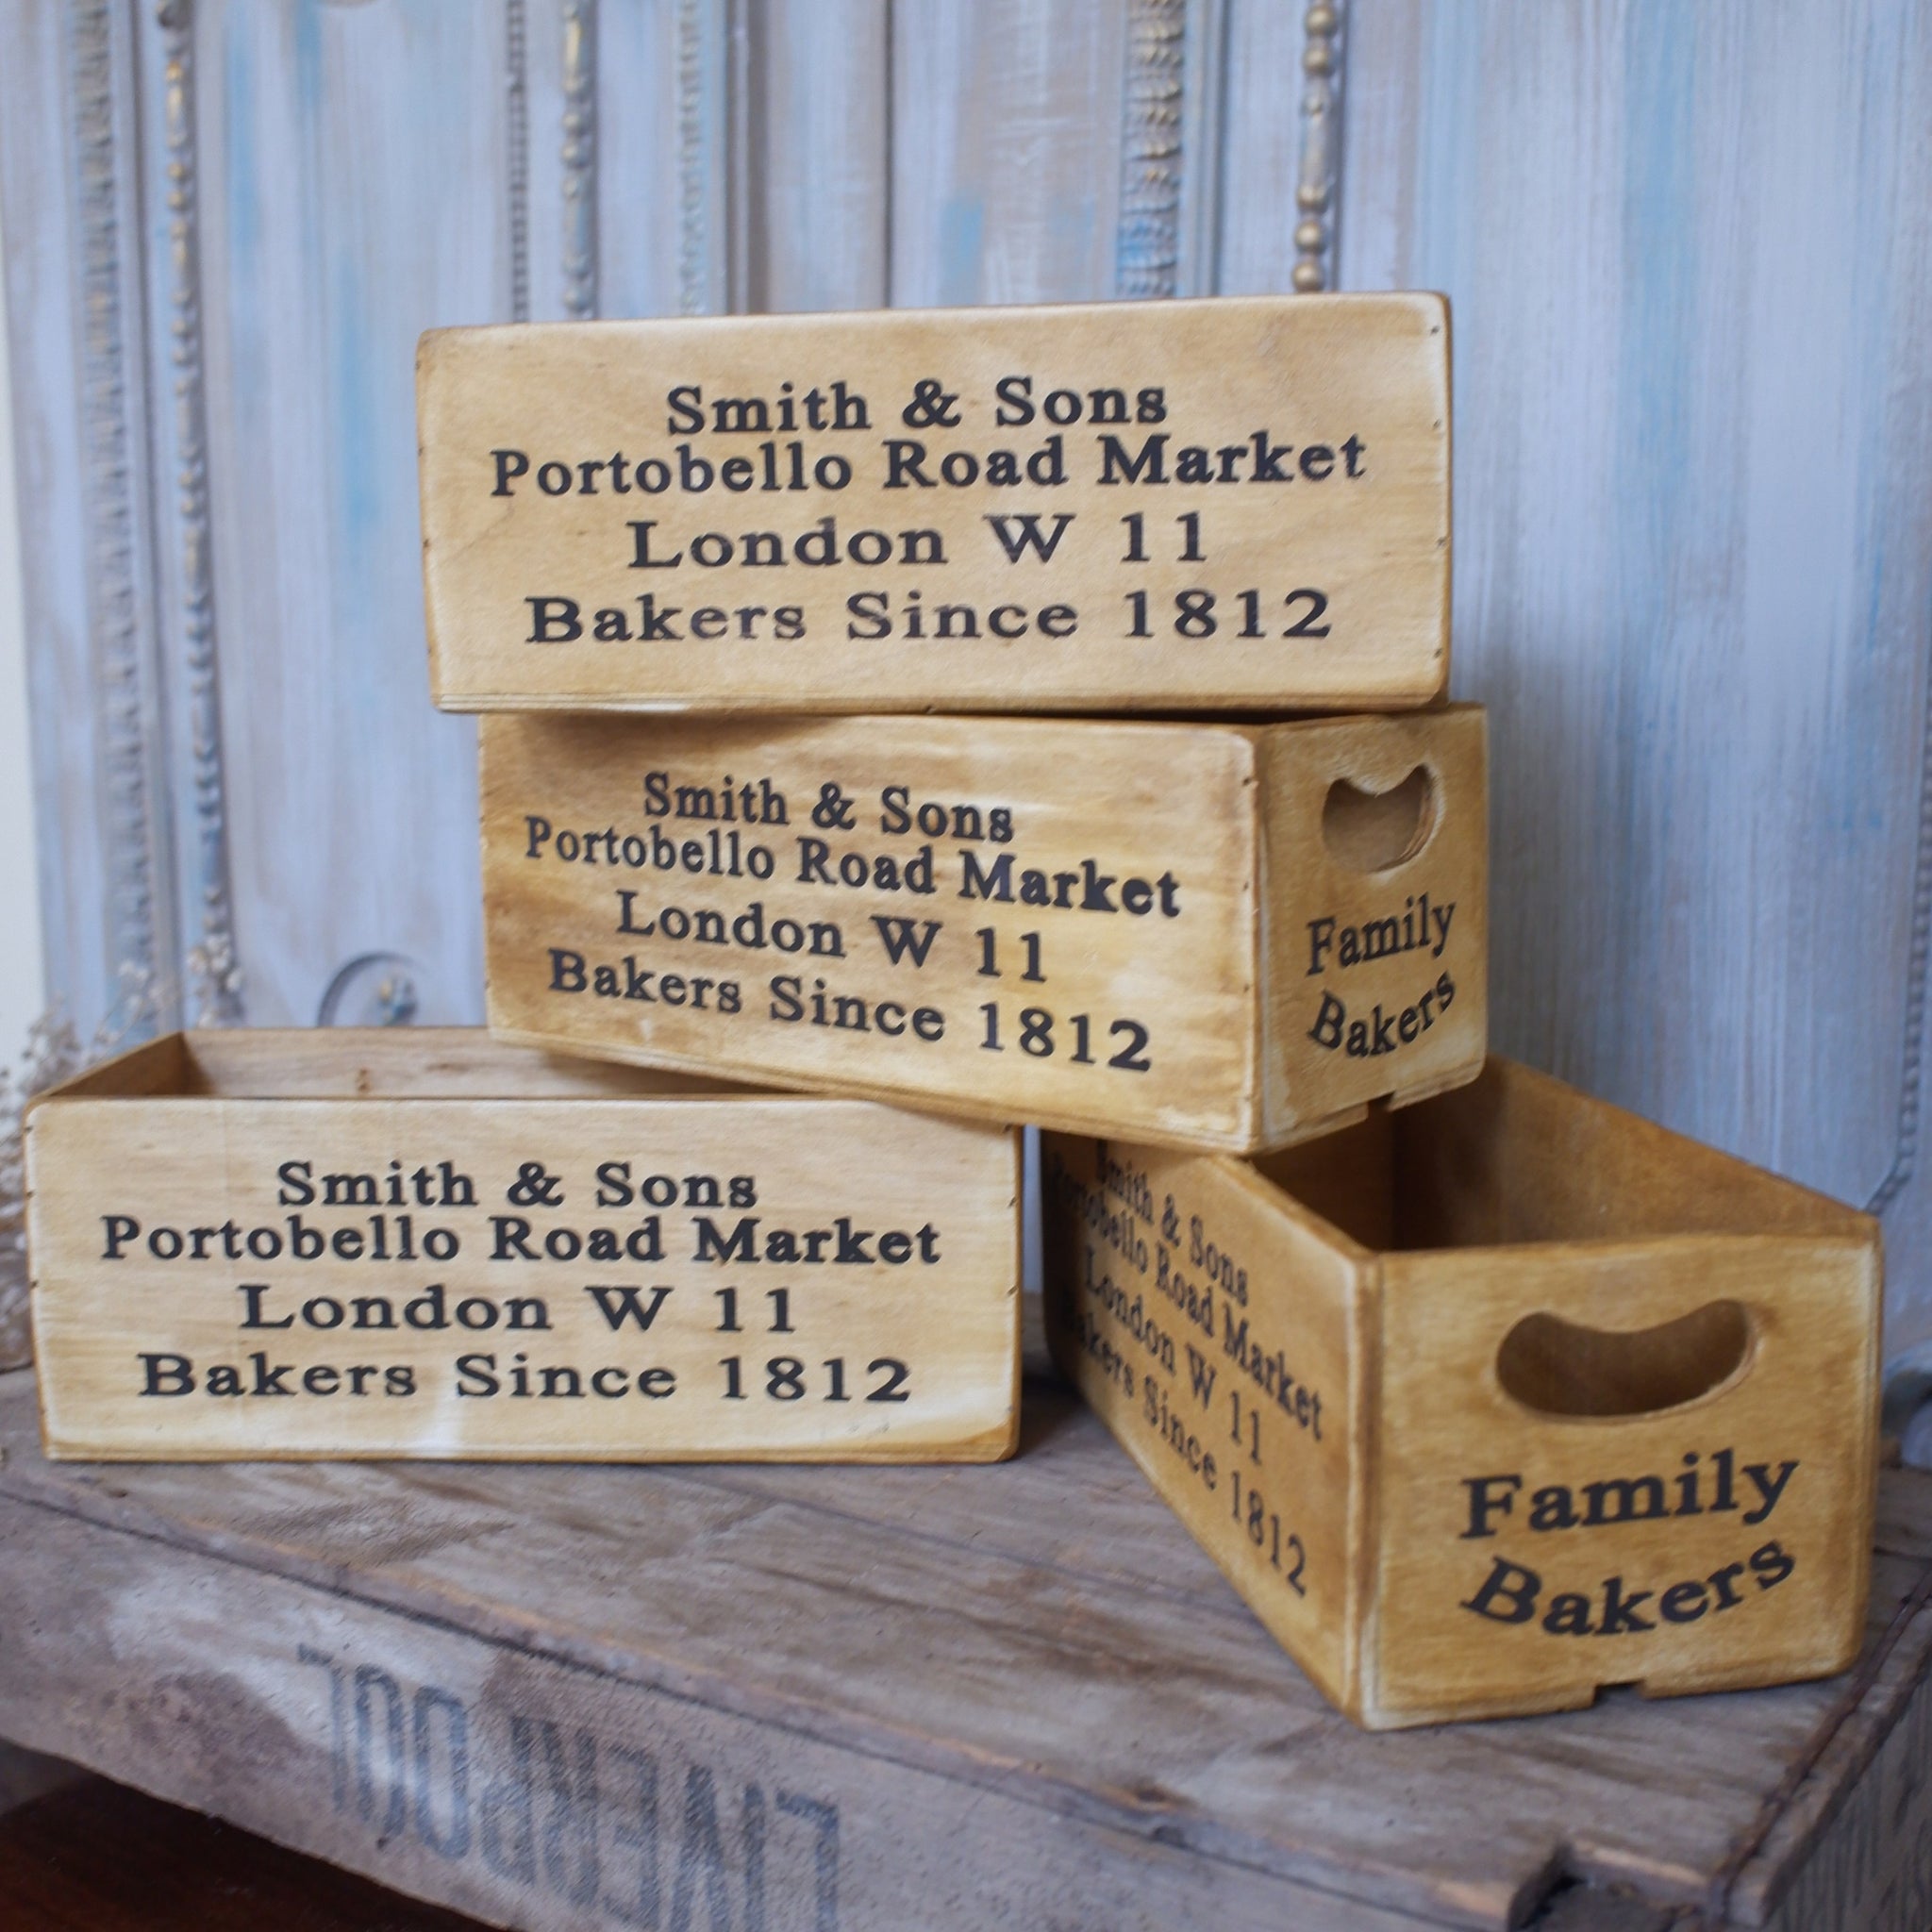 New Storage Box  This is a rustic shabby chic vintage style wooden storage/display box, lightweight with handles and written detail all around. Price is per box @£7.99 each.  Measures approx; H10.5 x W28 x D12.5cm